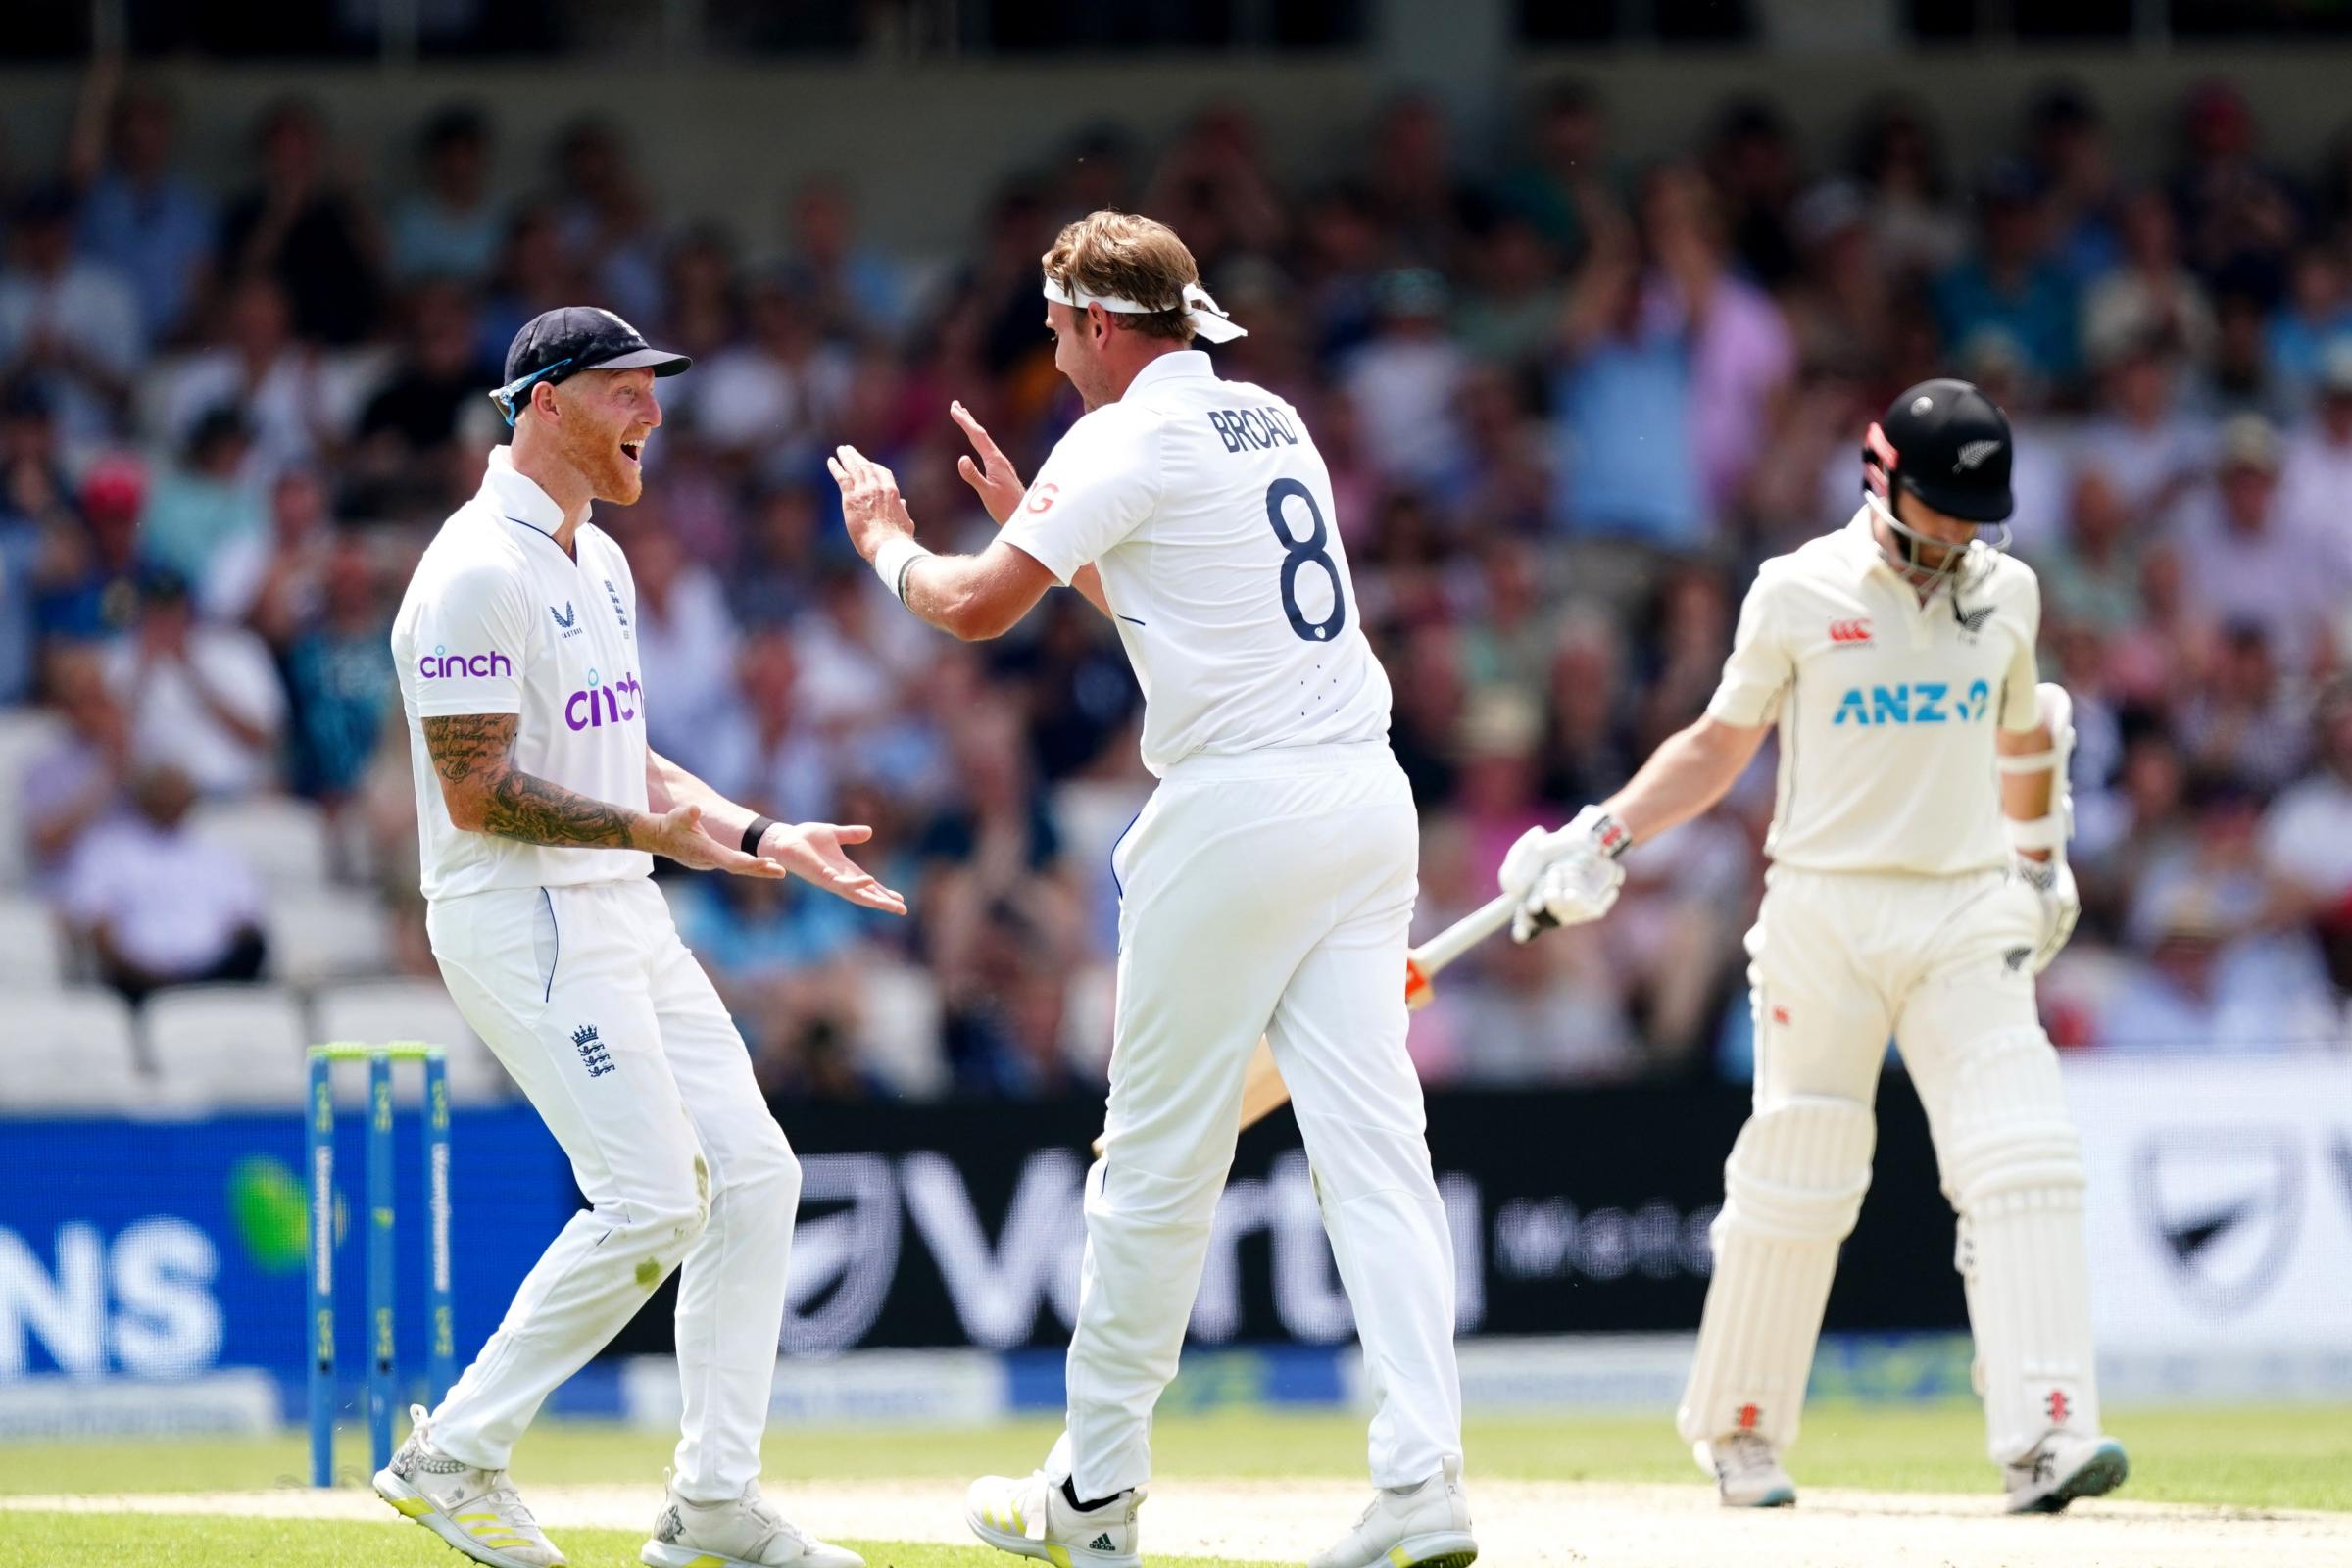 Stuart Broad double and freak dismissal helps put England on top at Headingley